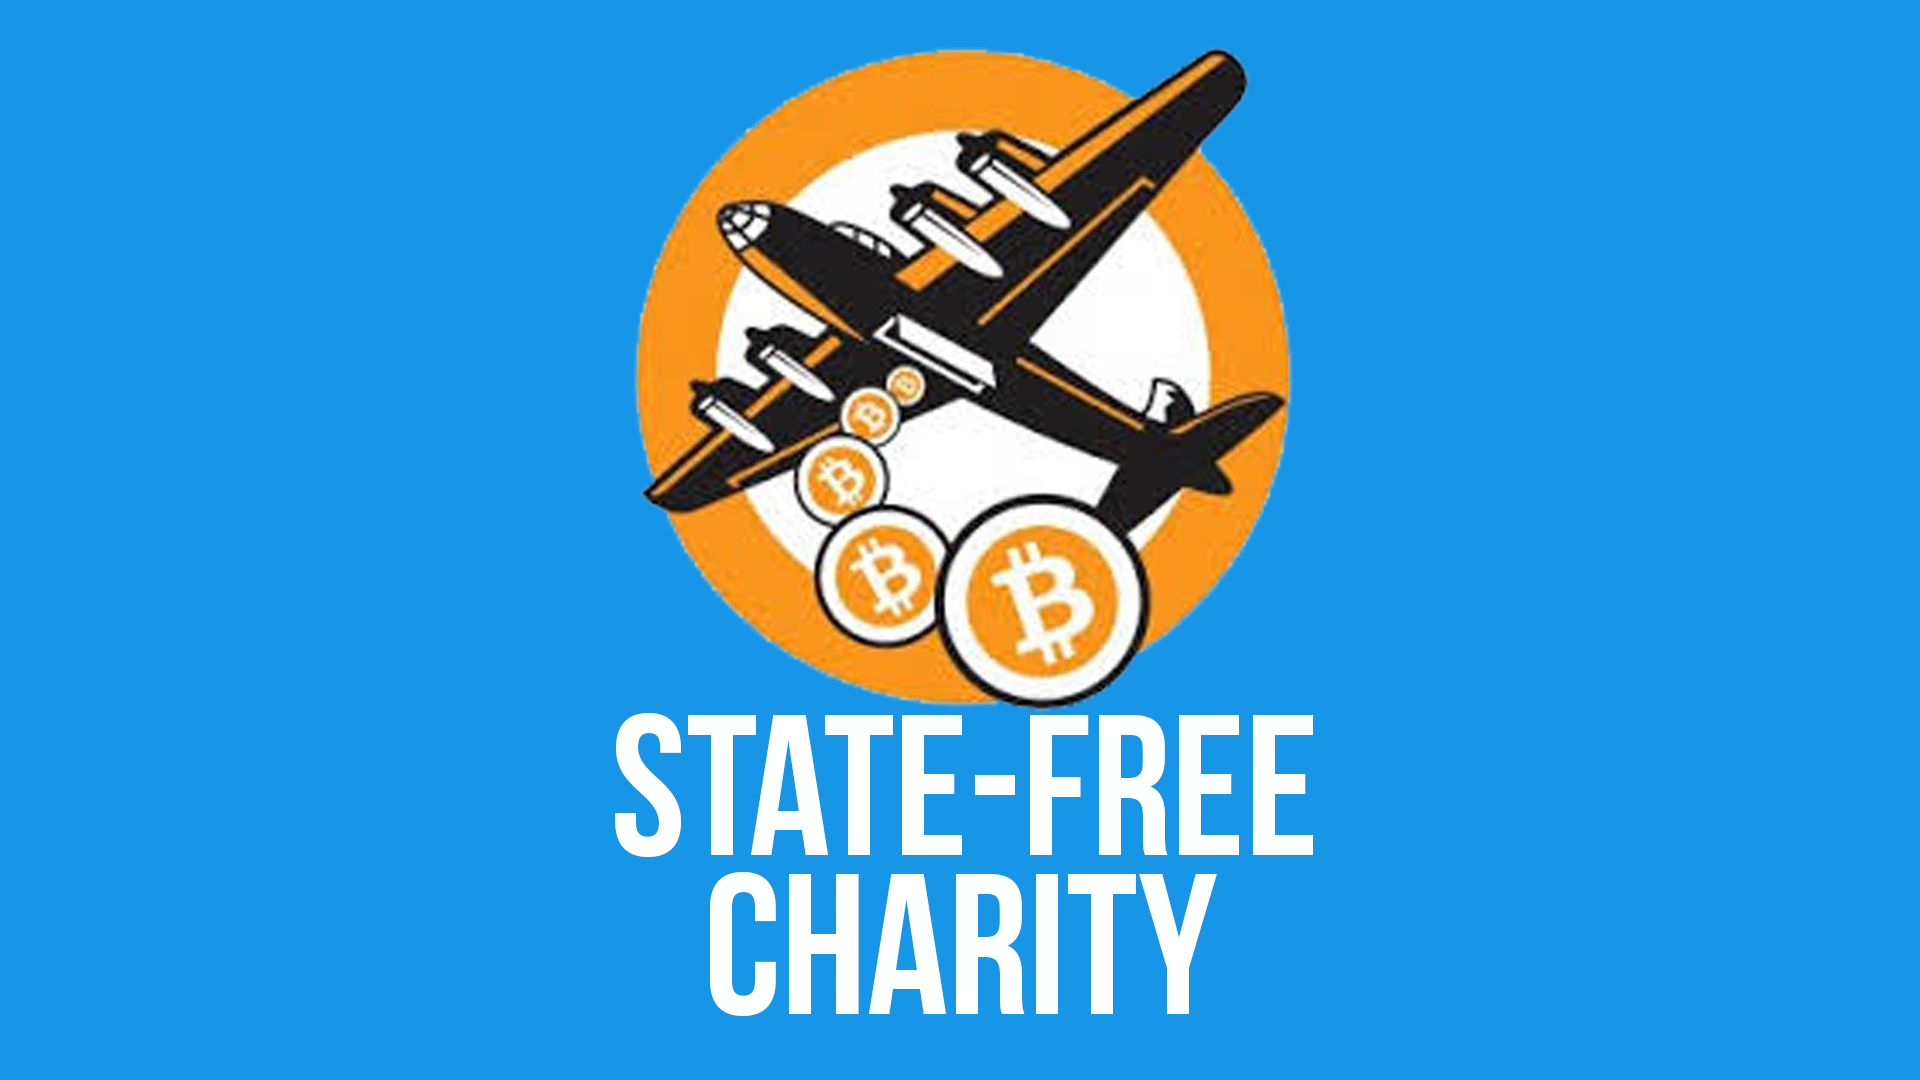 PNN #121 How To Support Stateless Charities